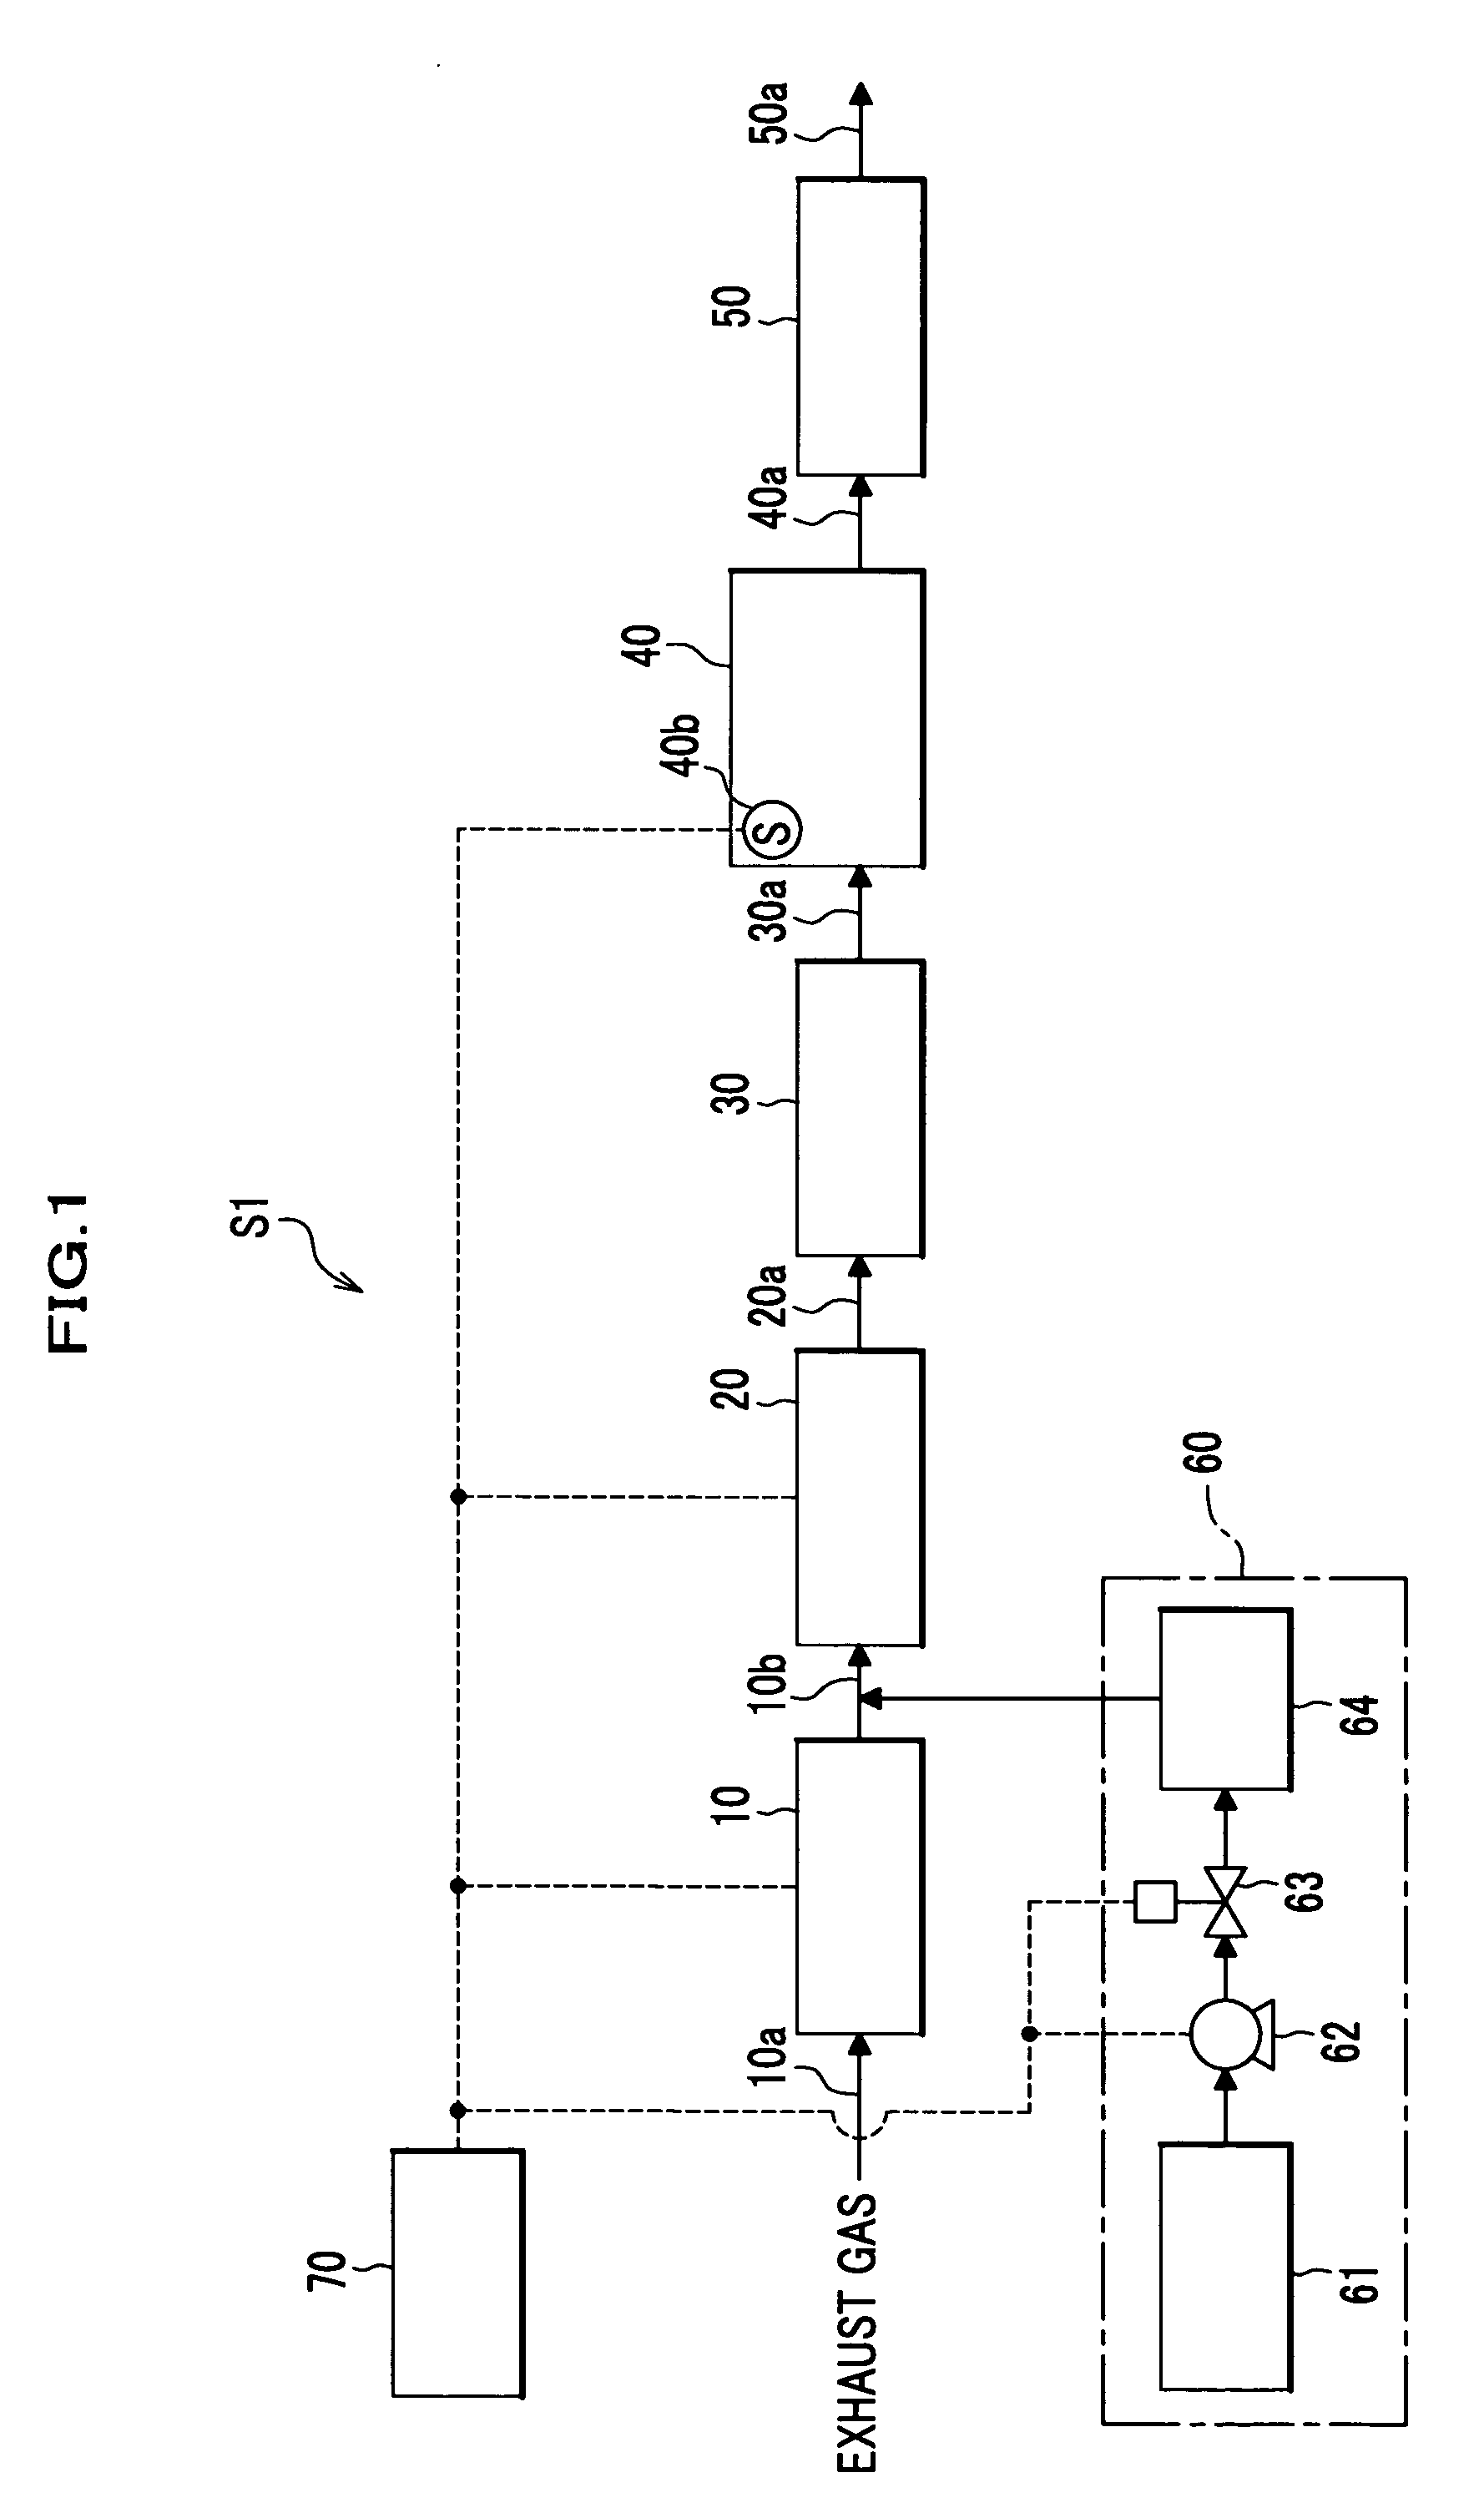 System and method for purifying an exhaust gas